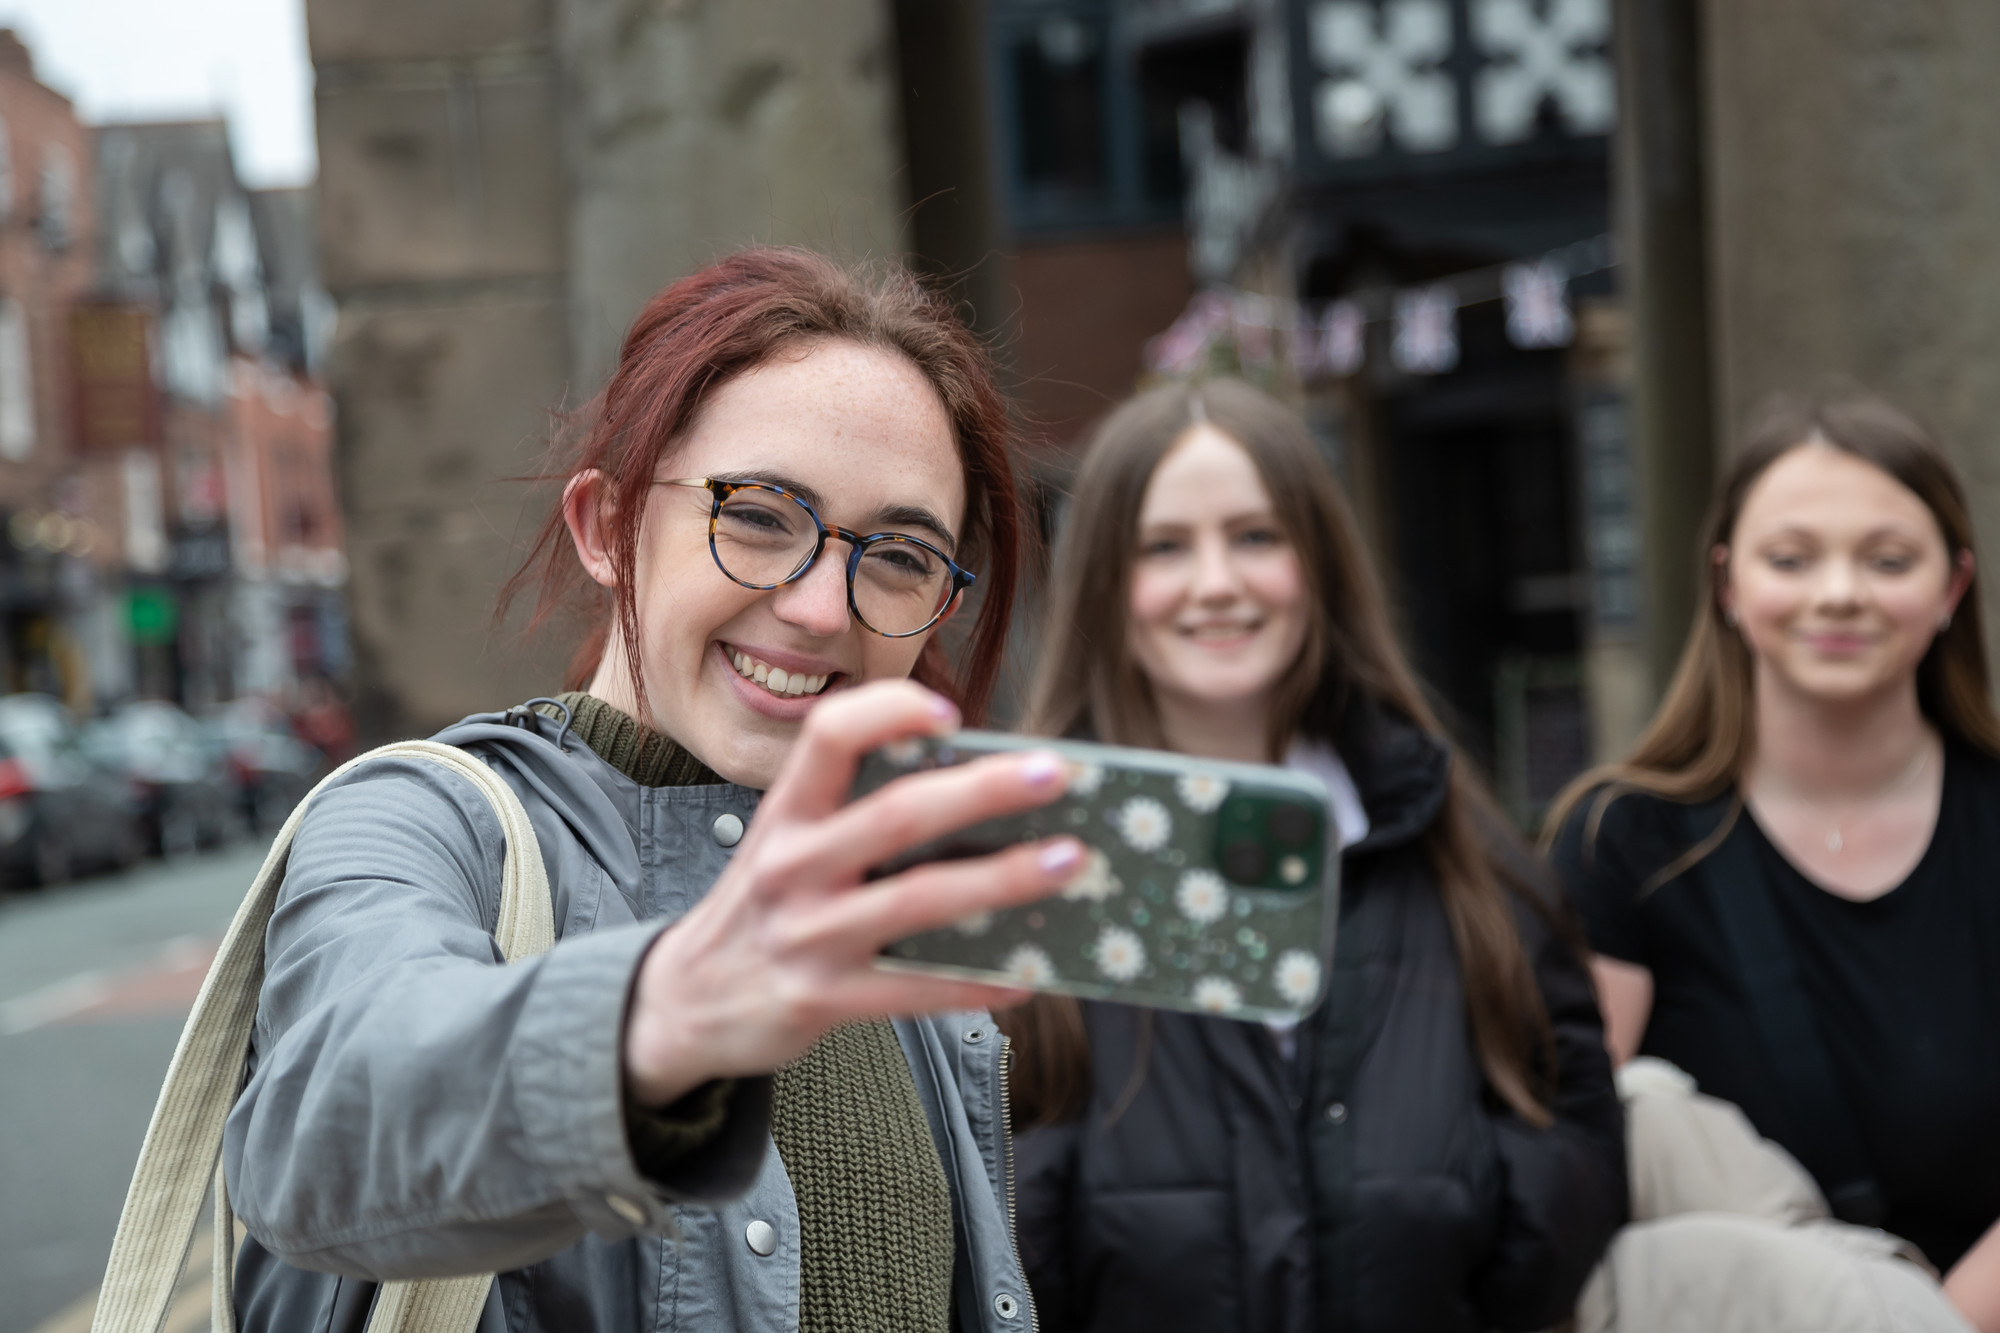 Female student holding her mobile phone taking a selfie with two other girls in the background